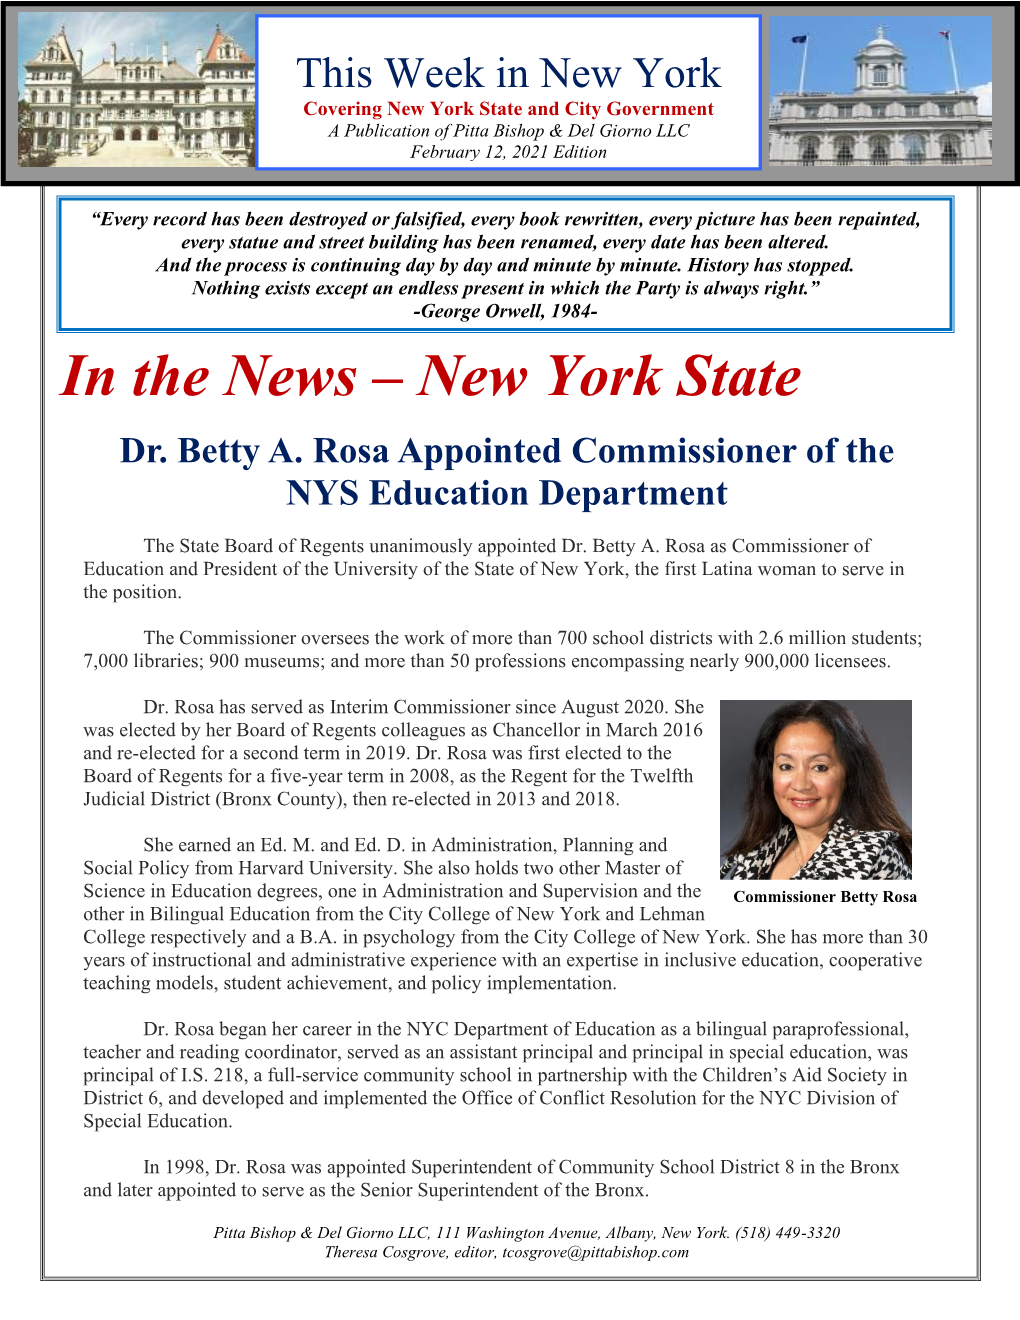 In the News – New York State